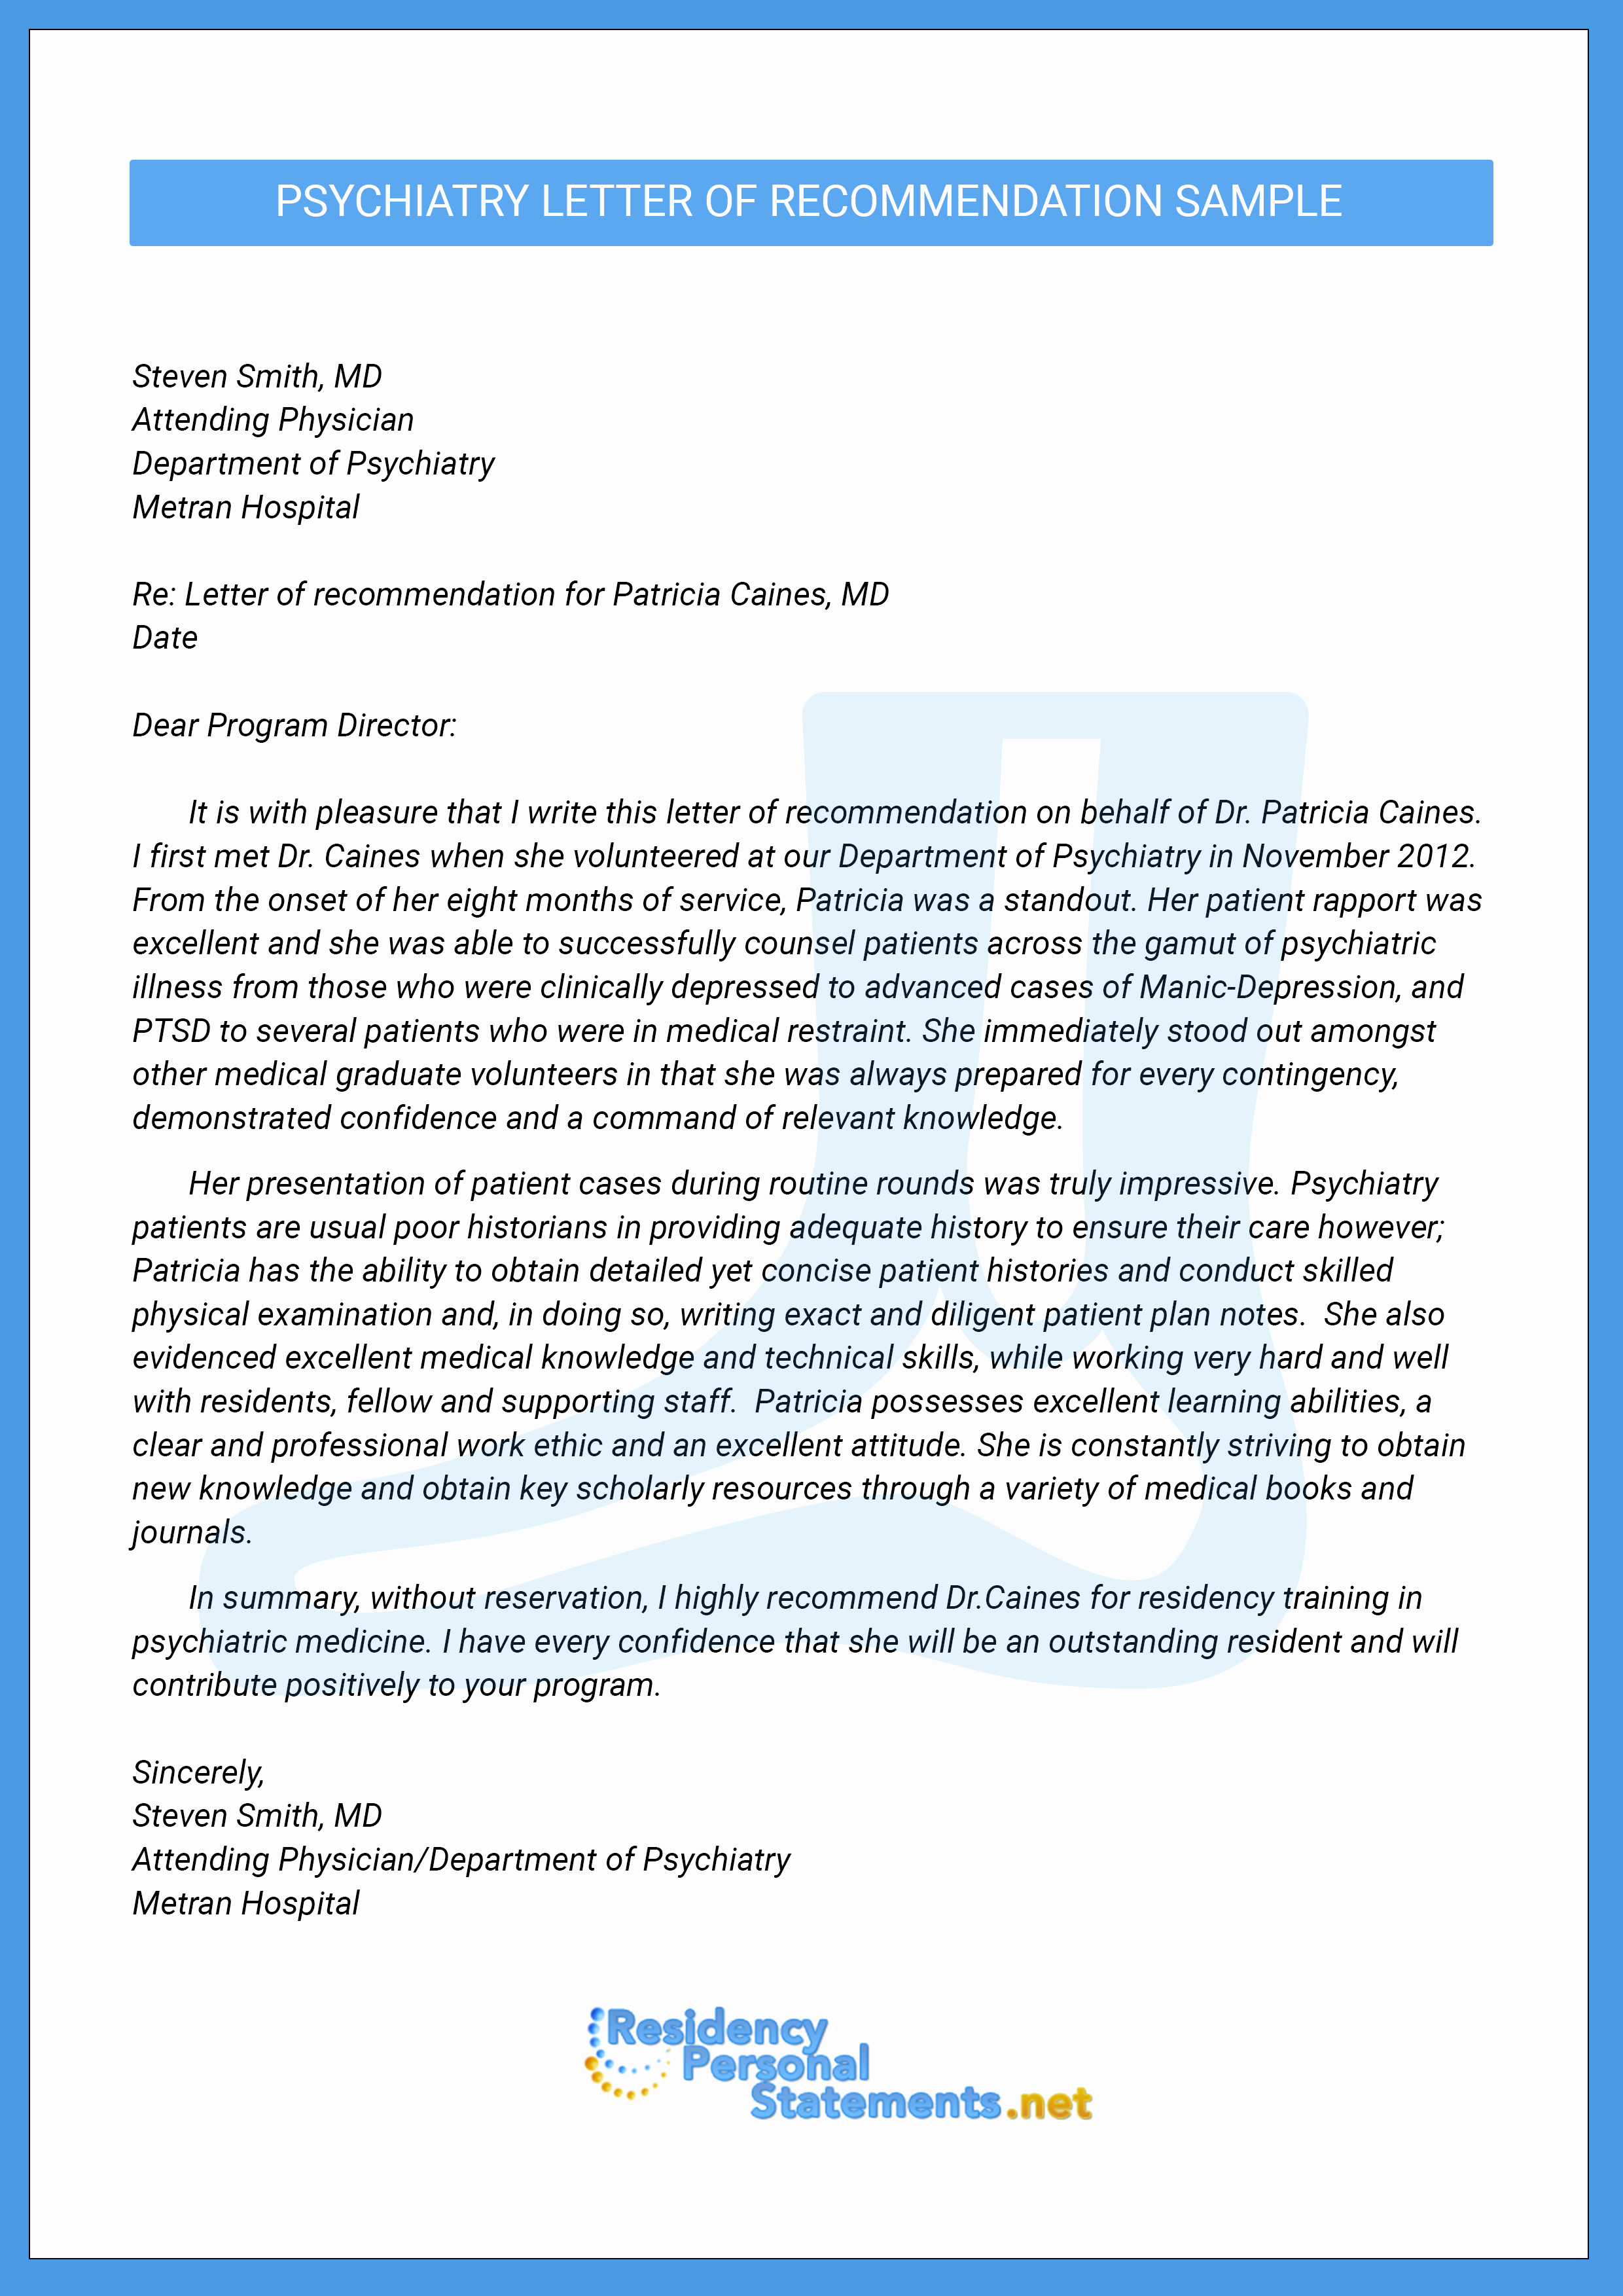 Residency Letter Of Recommendation New Psychiatry Residency Letter Of Re Mendation Sample